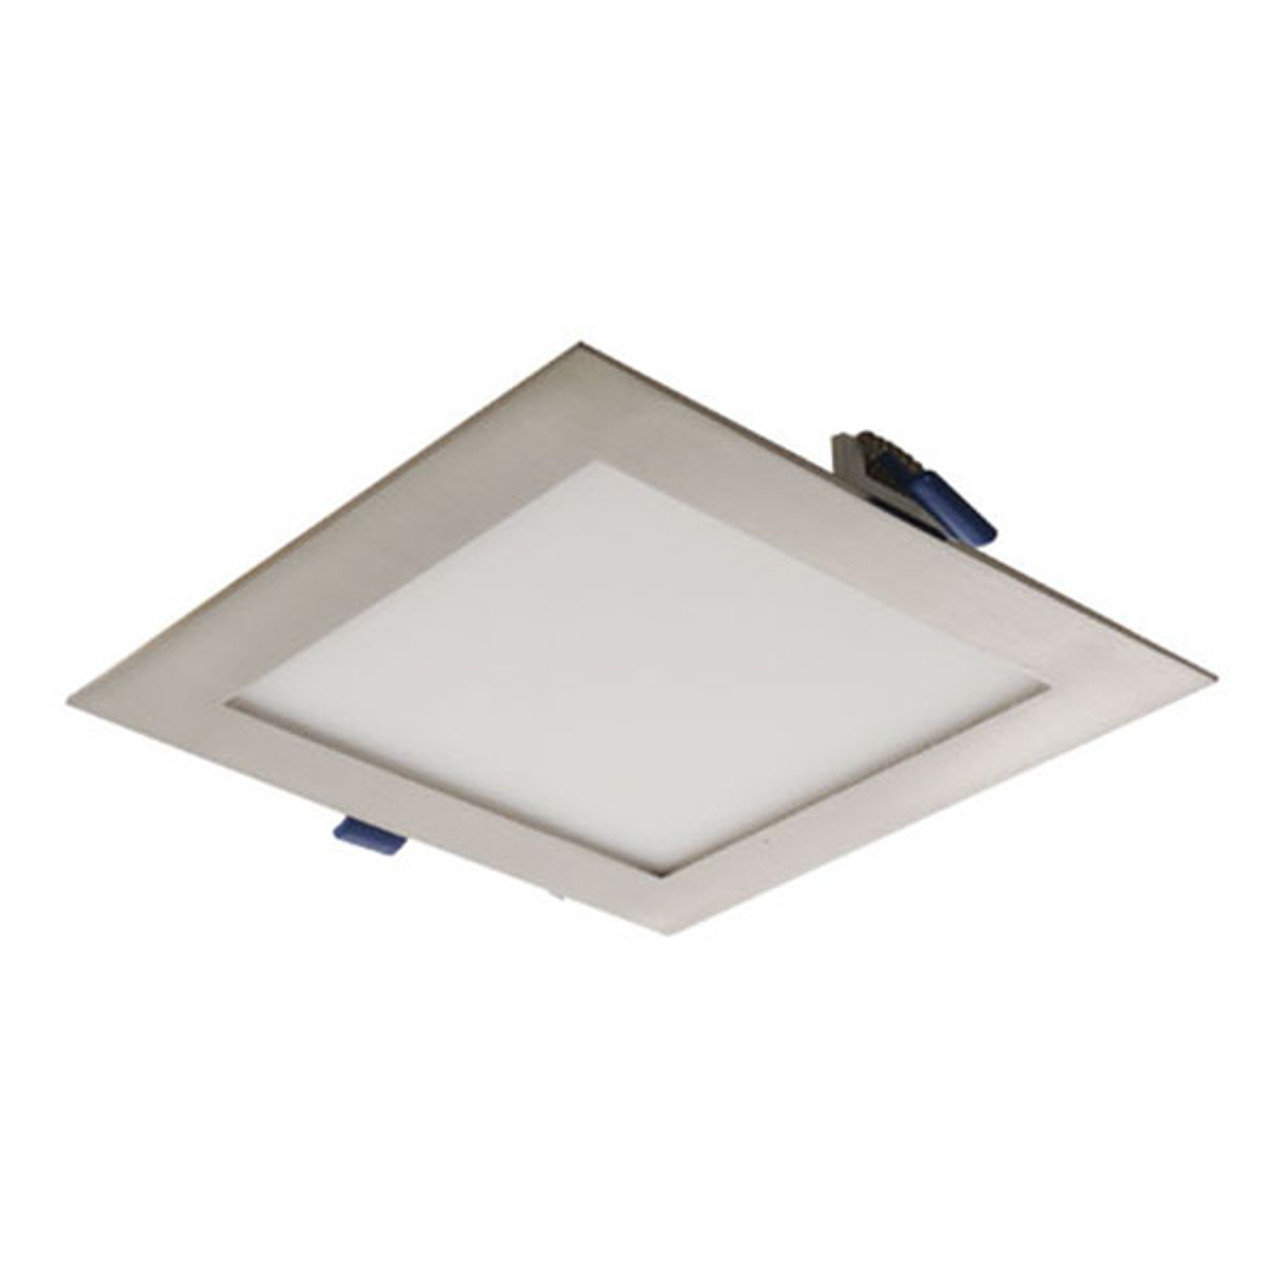 6" Elco Ultra Slim LED Square Panel Light 700 Lumens - Cans & Fans